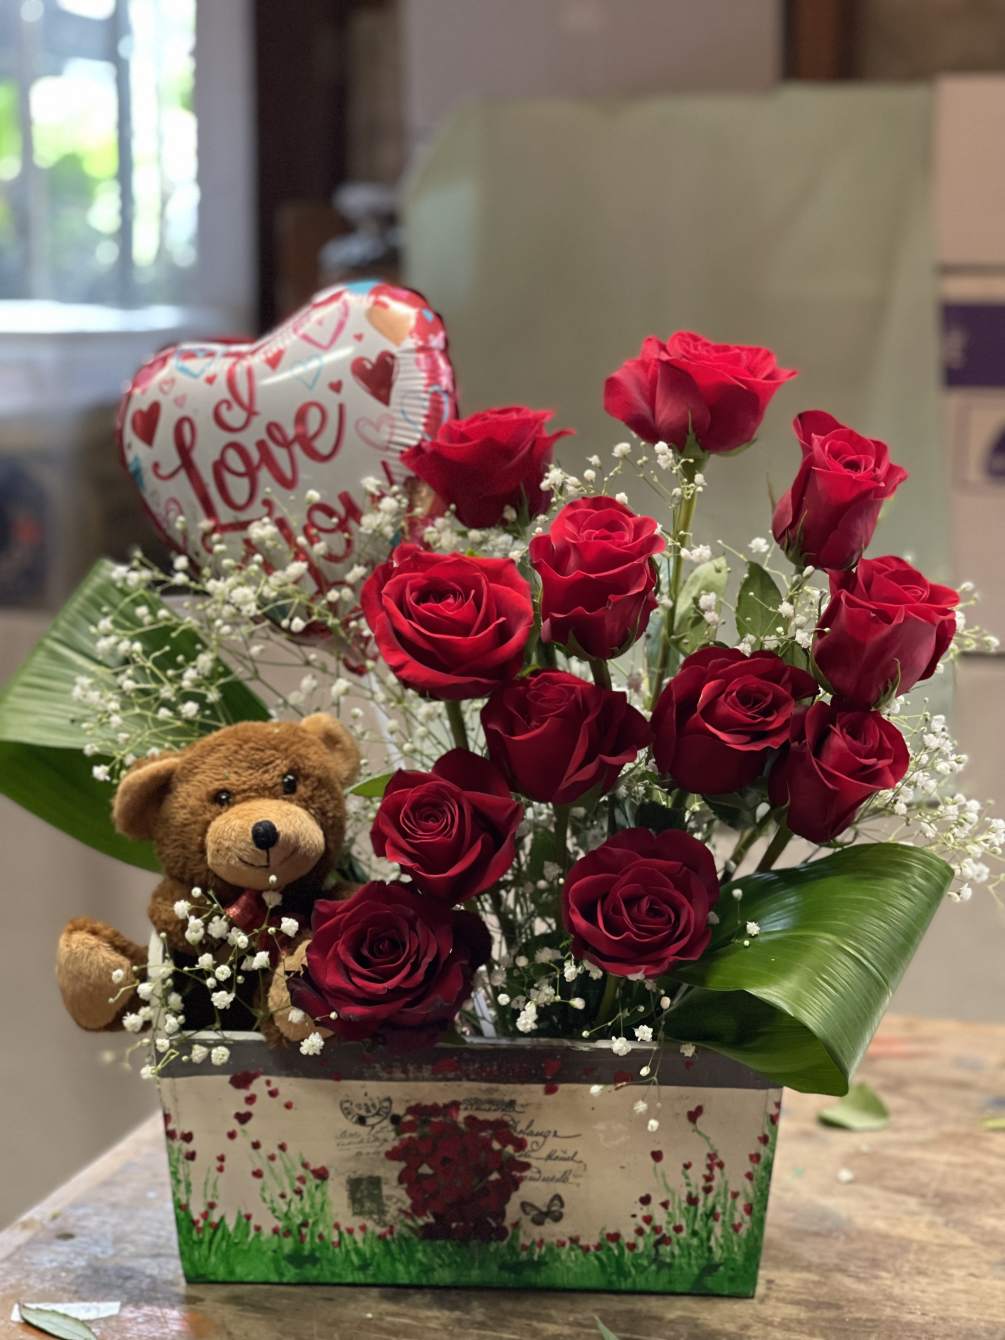 Cute arrangement of 12x roses, a teddy bear, and a valentines balloon